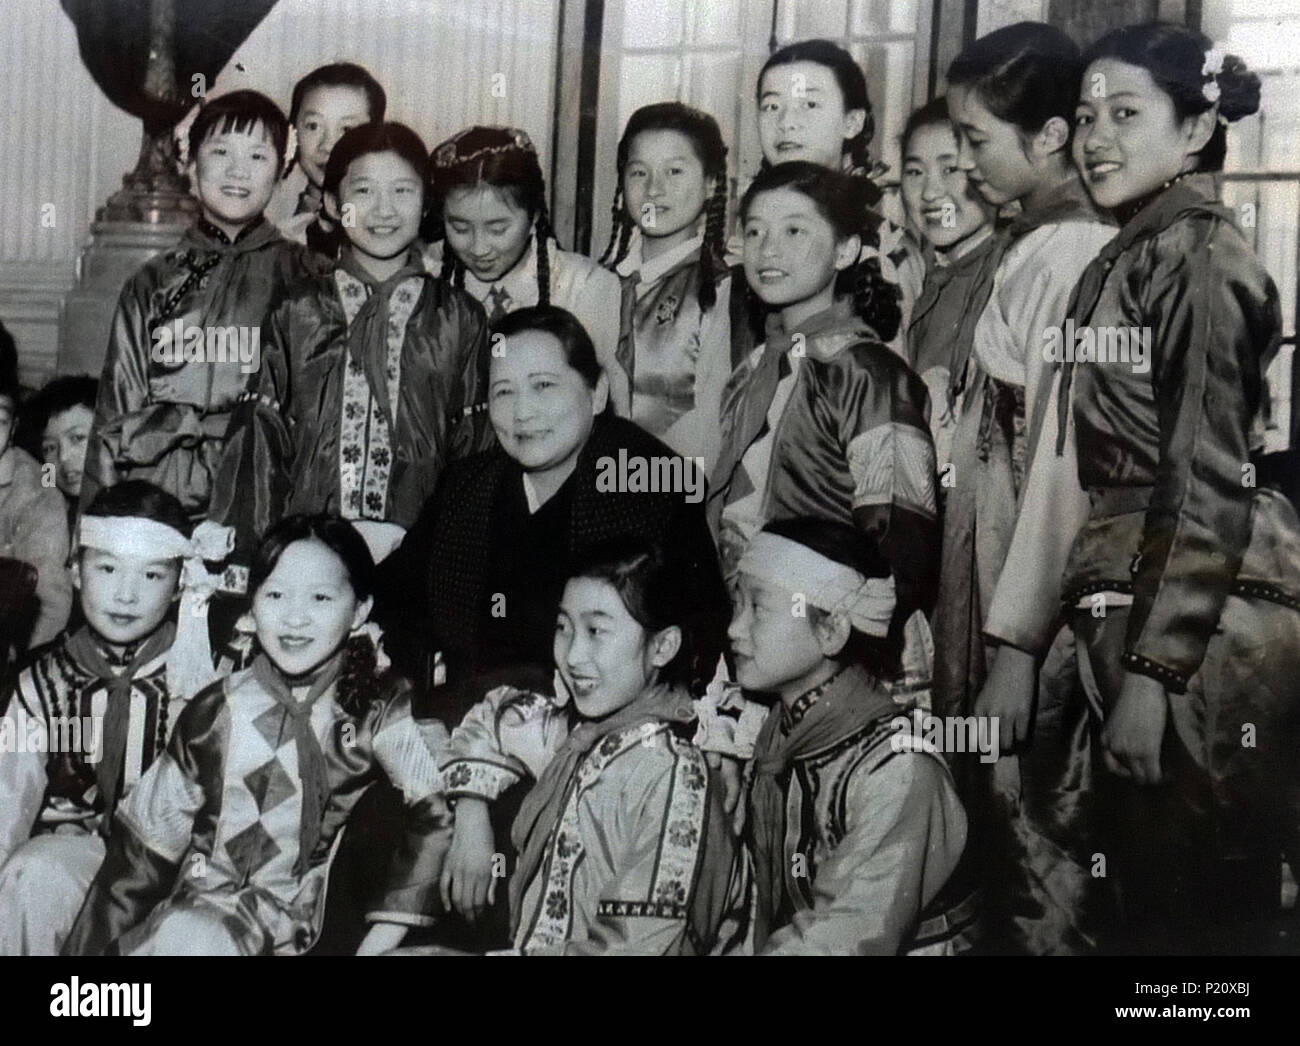 Shanghai. 13th June, 2018. File photo taken in Jan. 1960 shows Soong Ching Ling posing with kids at the Children's Palace under the China Welfare Institute (CWI) during the Chinese Spring Festival in Shanghai, east China. This year marks the 80th anniversary of the CWI, founded by Soong Ching Ling in 1938. The Shanghai-based organization focuses on maternal and child health, education and social welfare. Soong Ching Ling, born in Shanghai in 1893, was the wife of Chinese revolutionary Dr. Sun Yat-sen, who led the 1911 Revolution. Credit: CWI/Xinhua/Alamy Live News Stock Photo